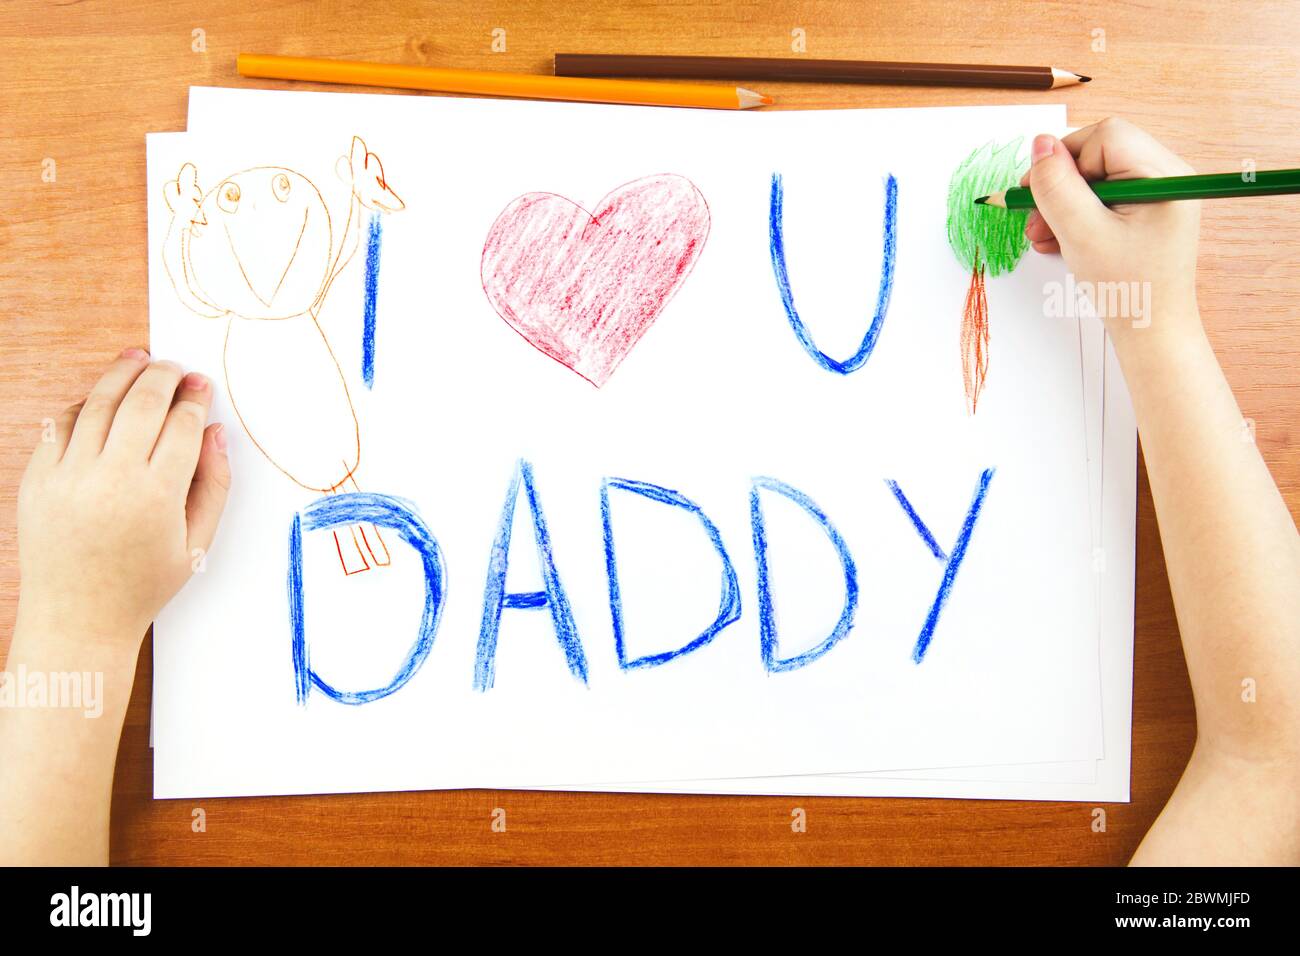 Fathers day concept. Childs hands drawing card with words I Love U Daddy, and red heart, and color pencils on wooden desk. Stock Photo